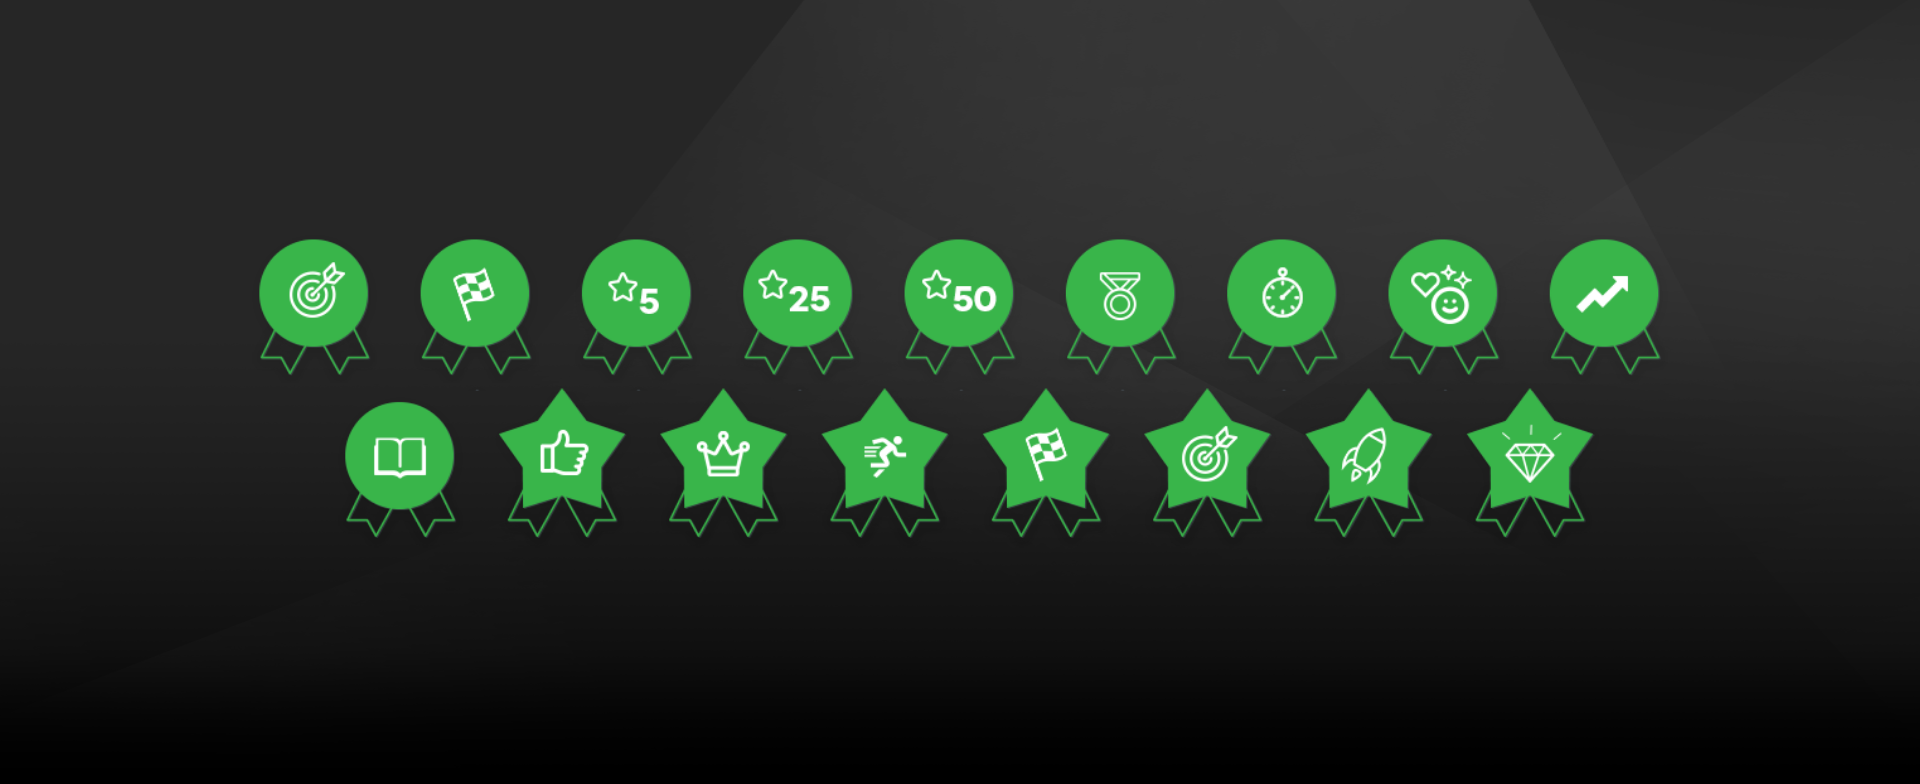 Skoda Sales Club banner with icons